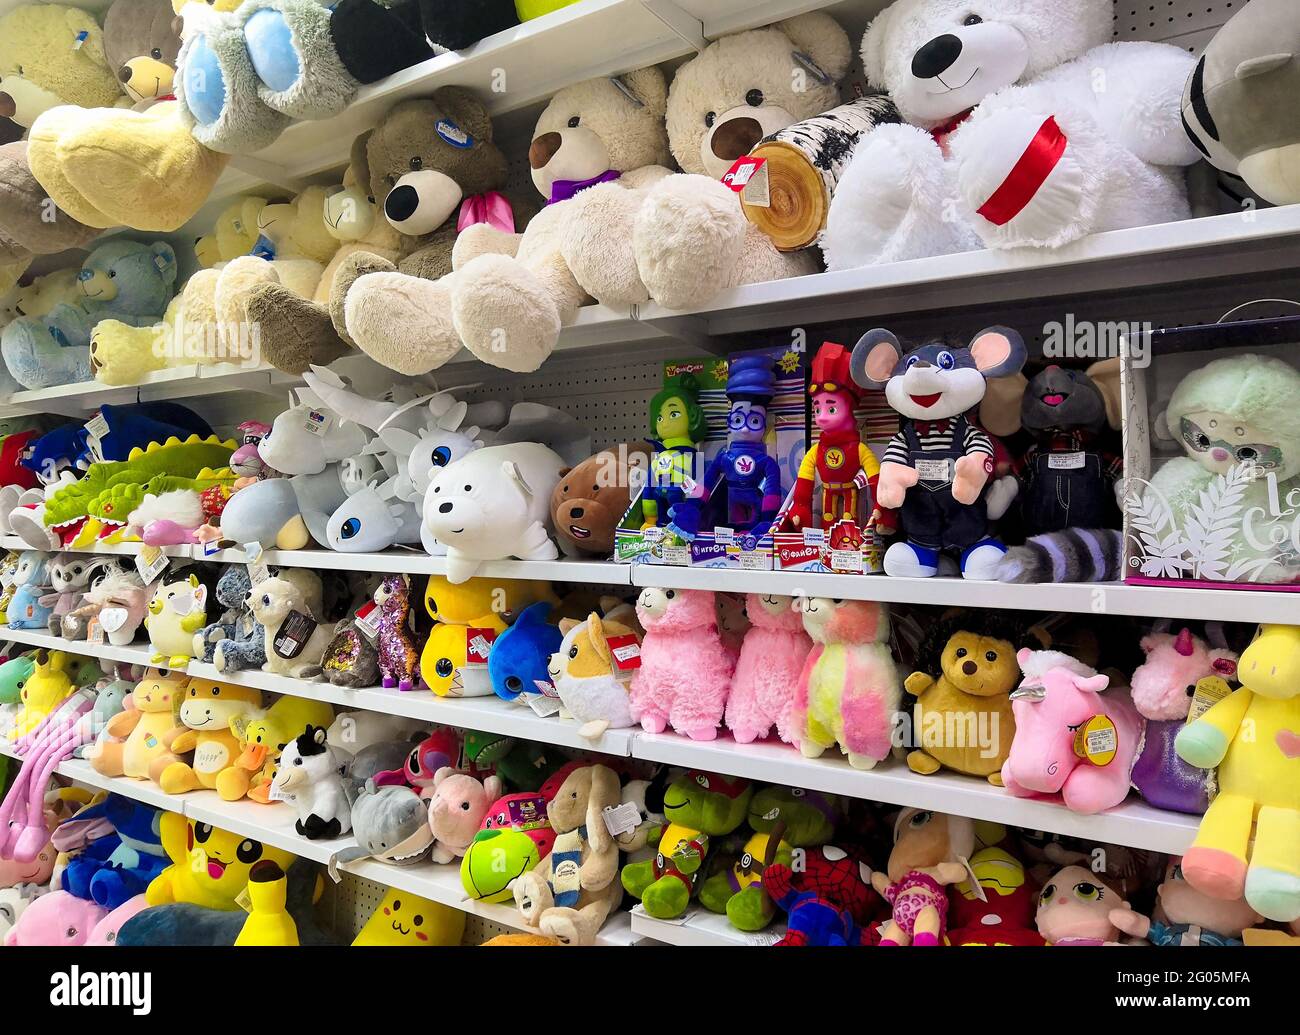 Sevastopol, Crimea - May 7, 2021: Shelves in store with soft children's toys of various manufacturers. Stock Photo